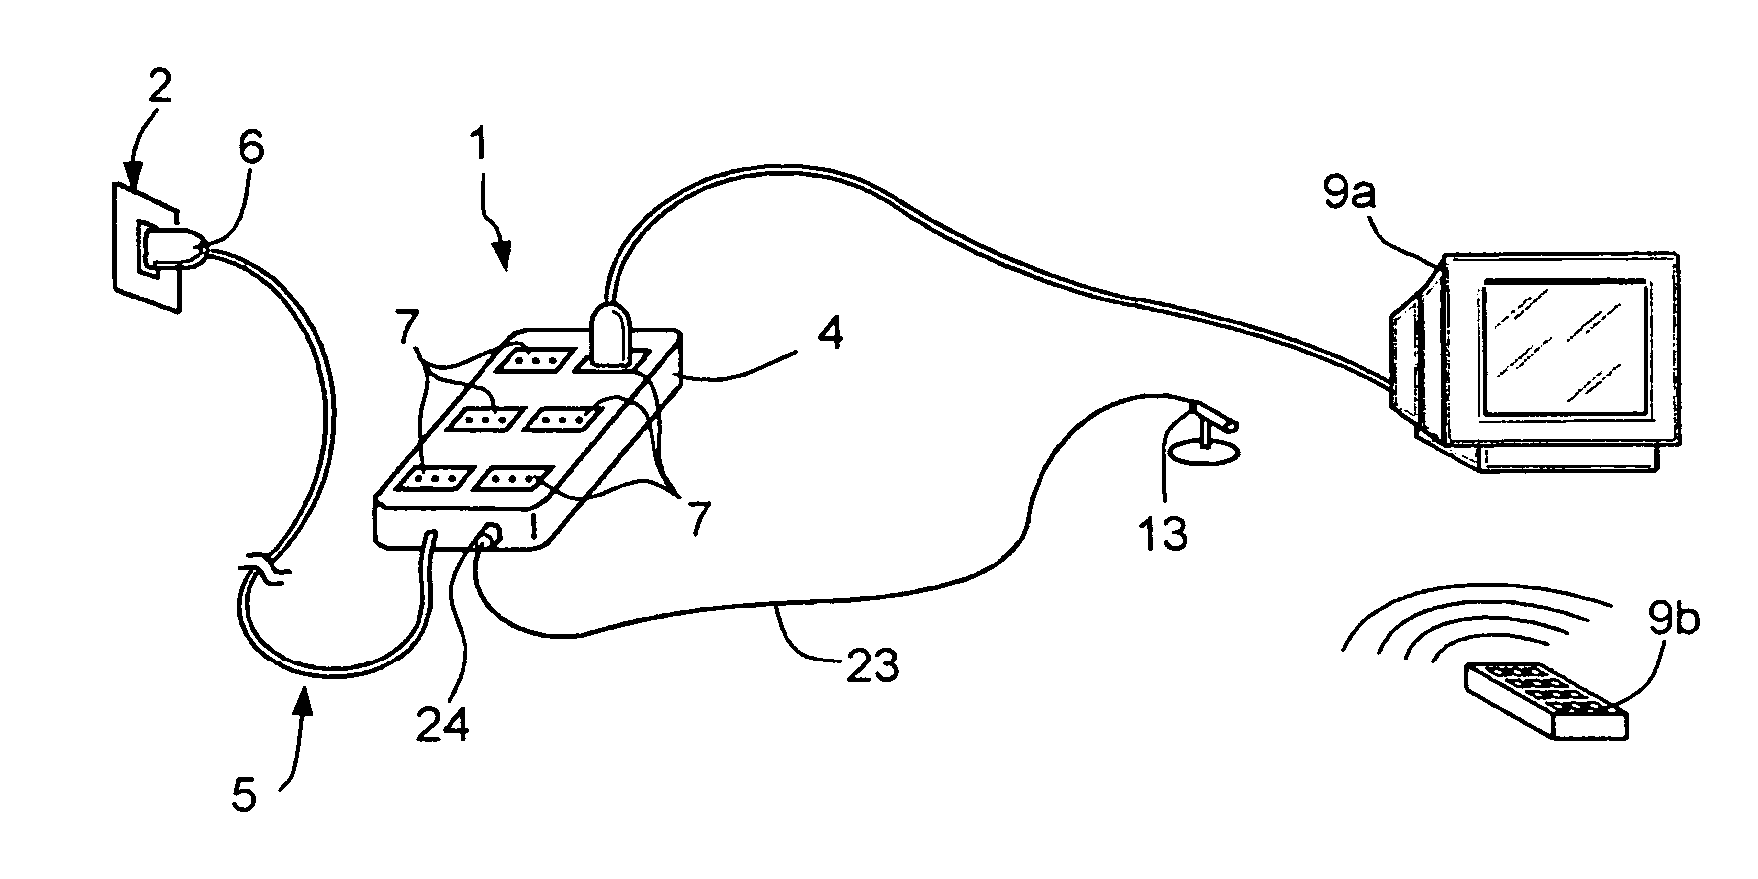 Device for connecting electric household appliances to an electric power main